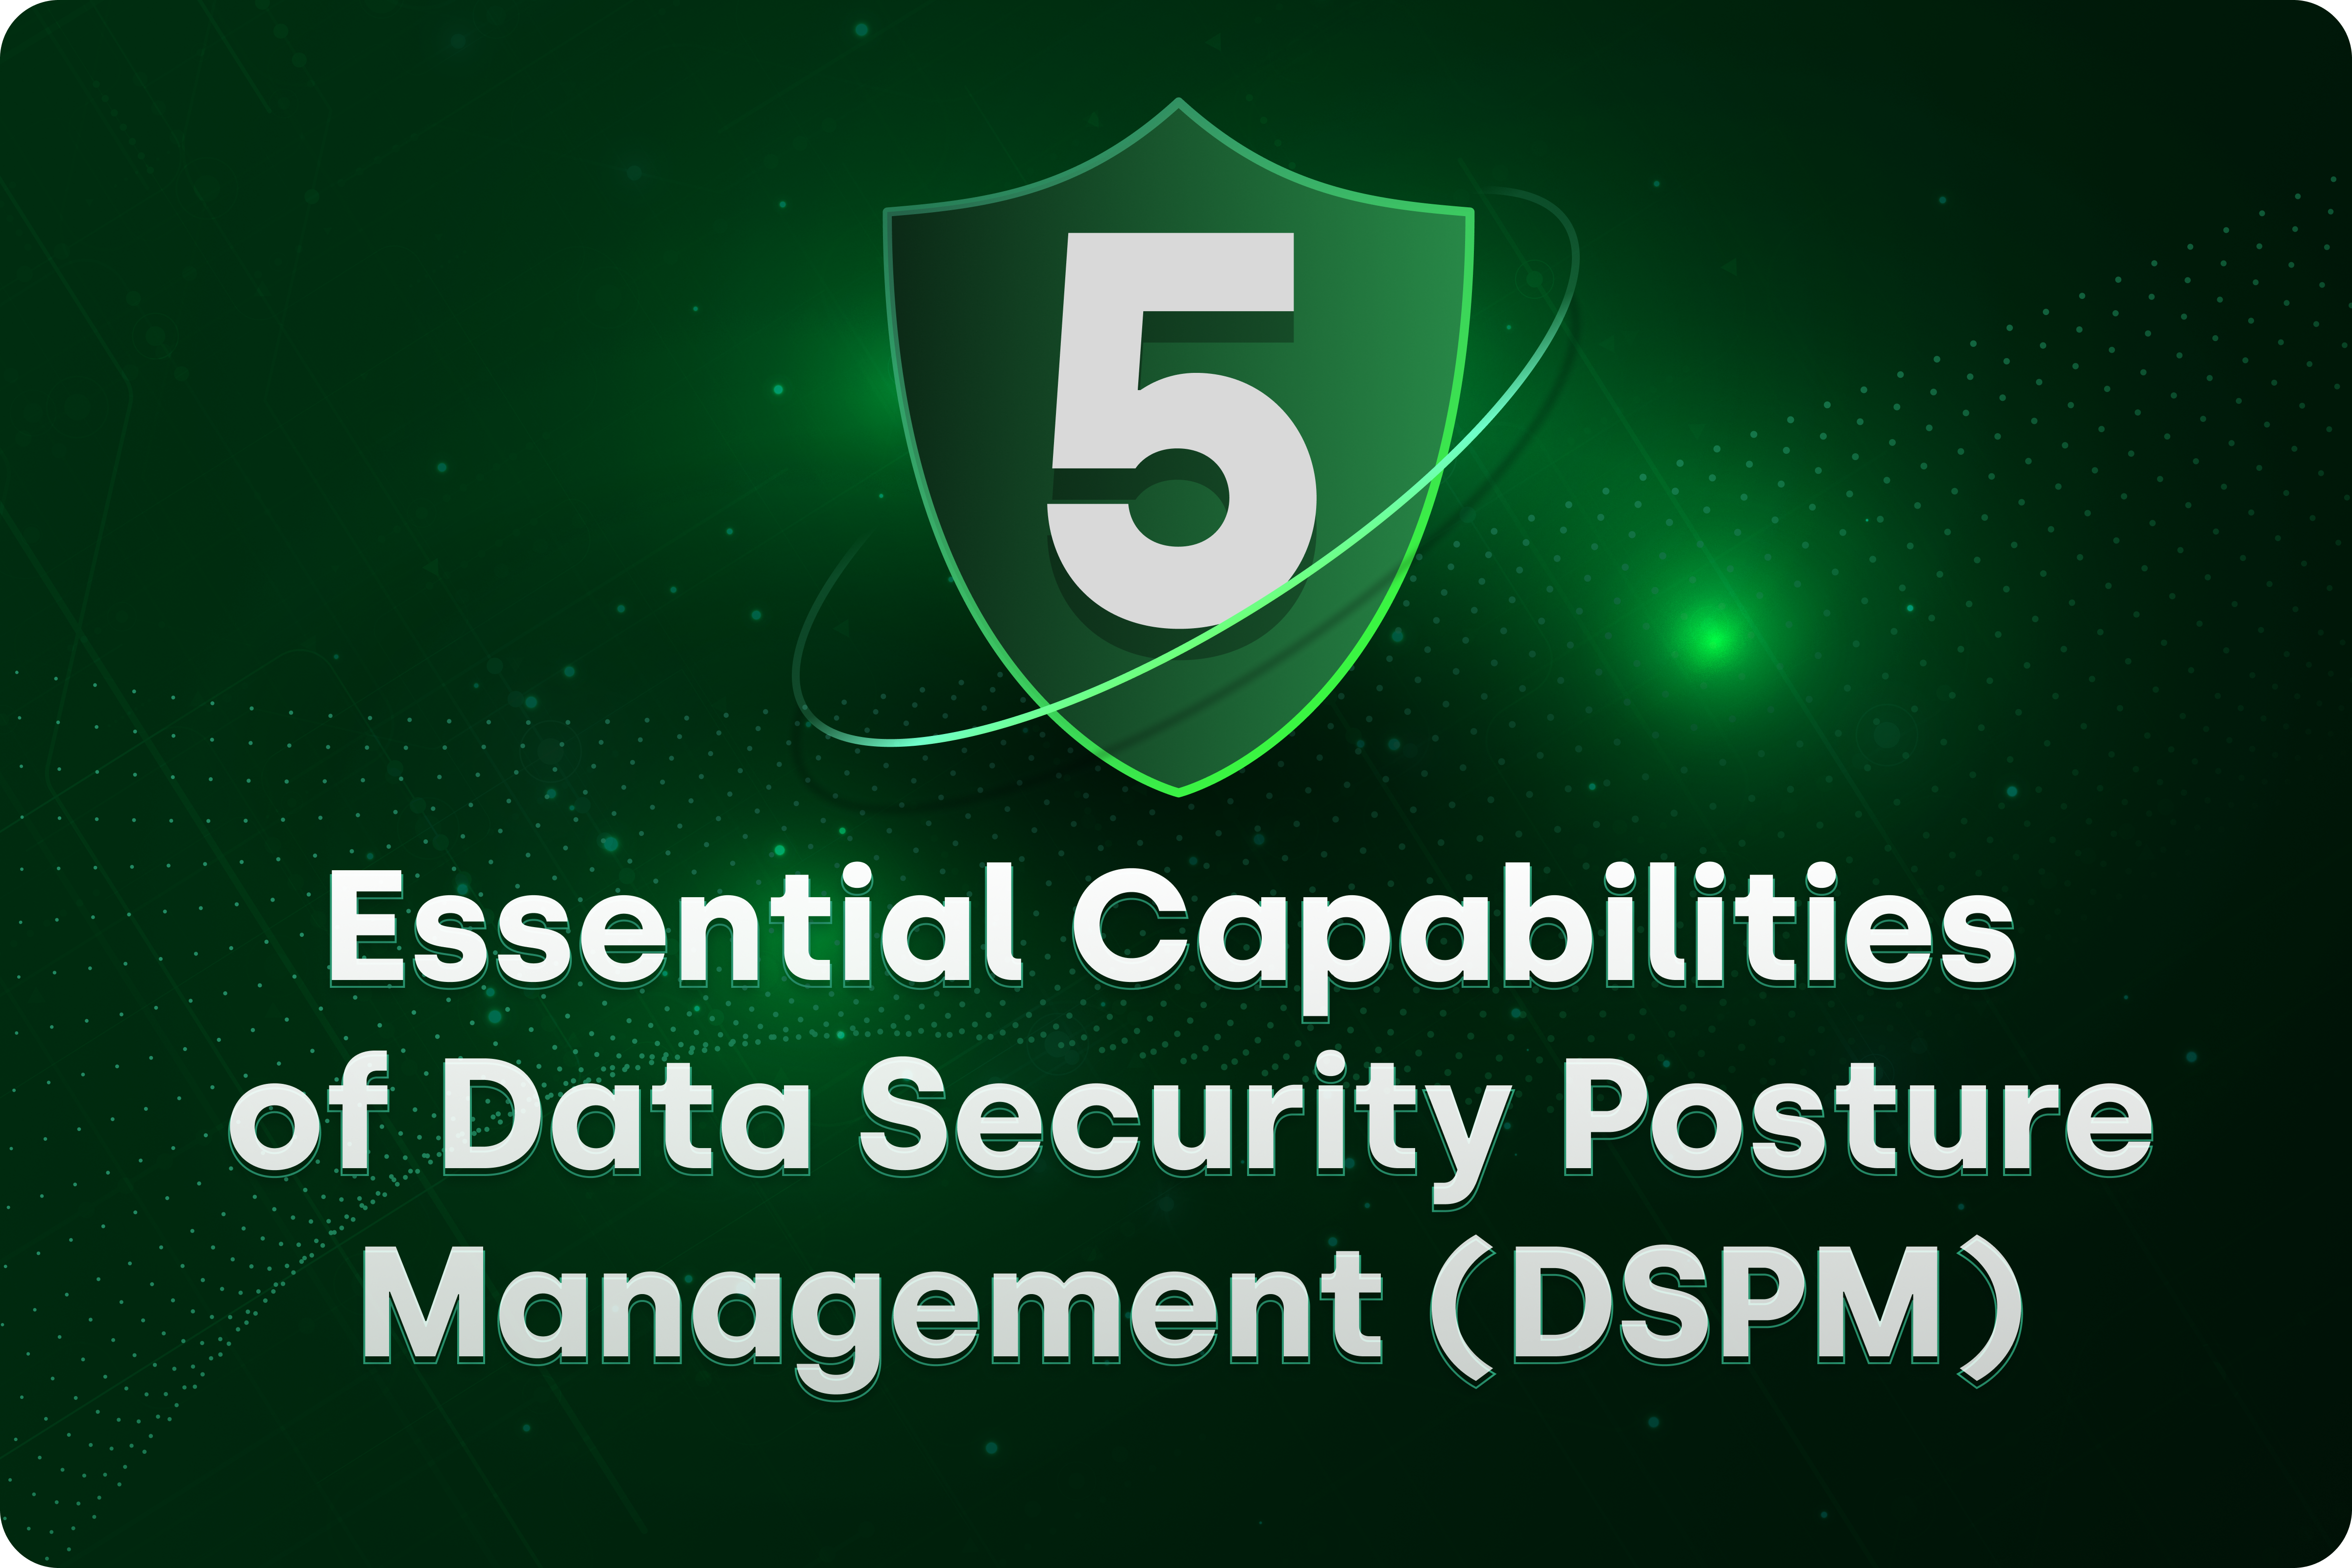 The Essential Capabilities of a DSPM Solution